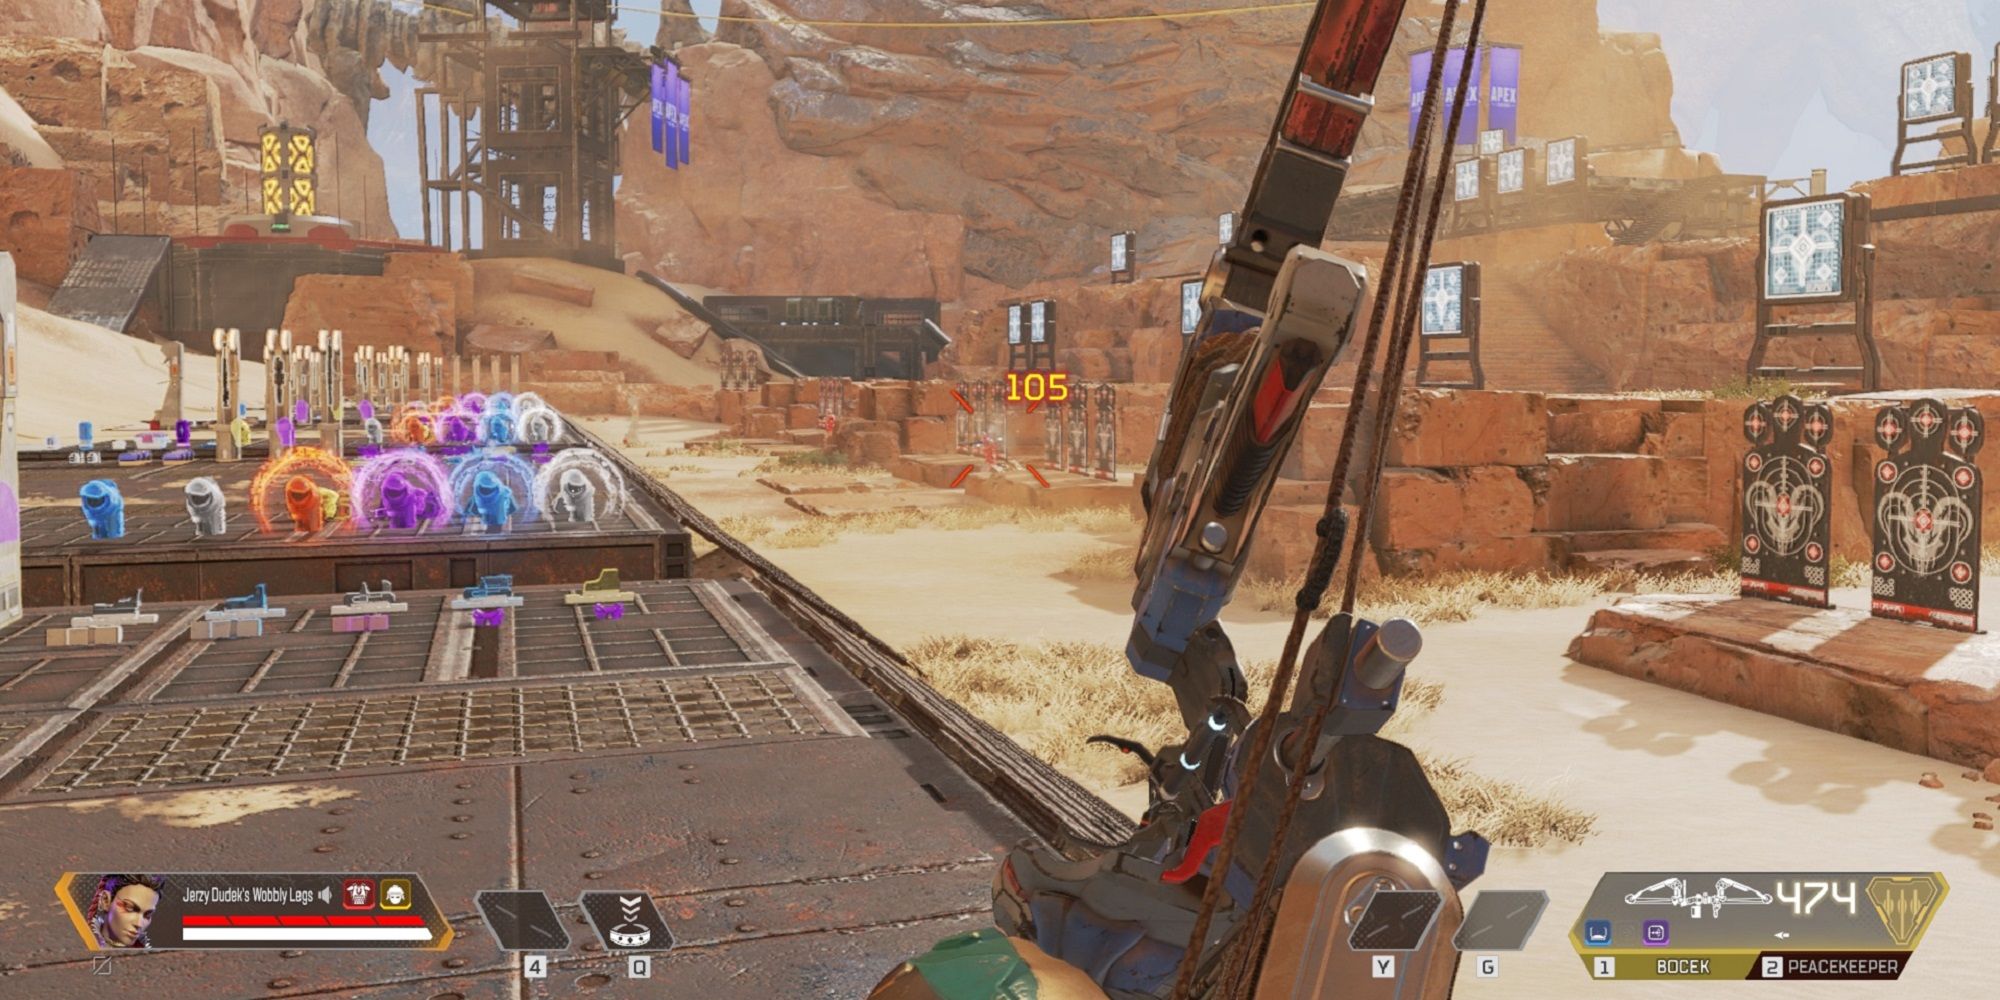 A view of the shooting range, showing the Bocek bow in Apex Legends